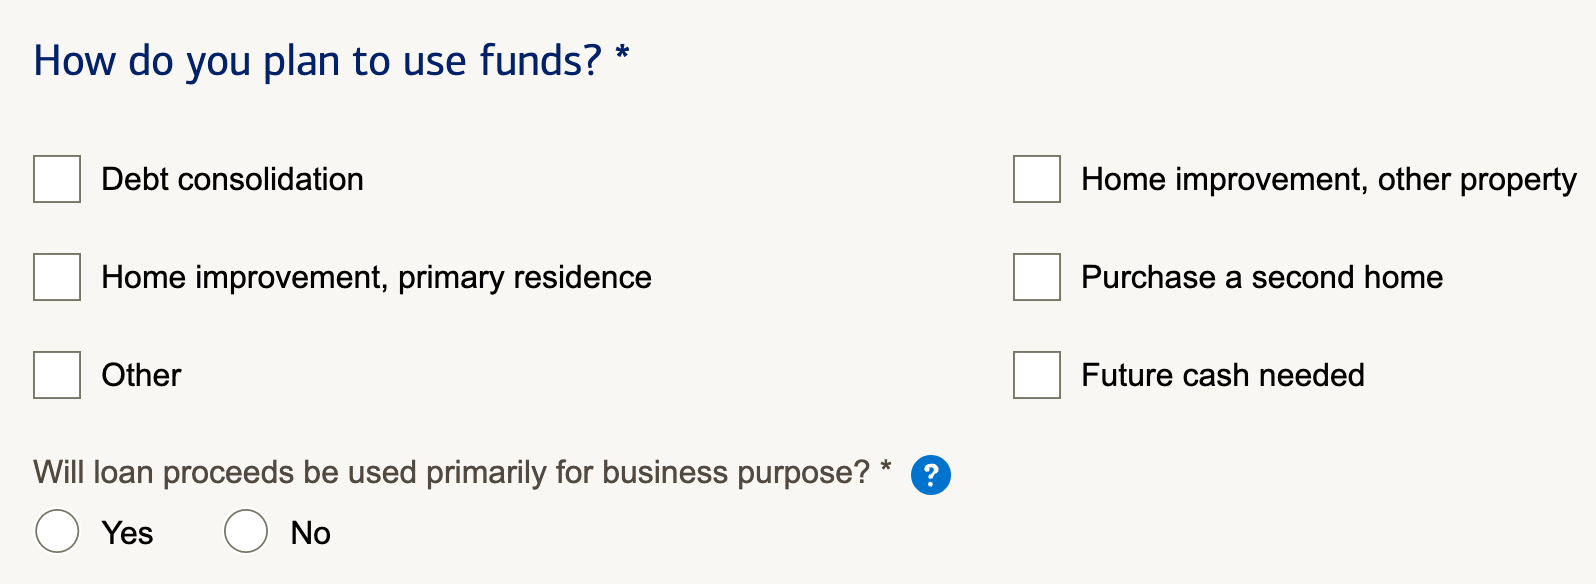 Image from Bank of America website asking borrower how they plan to use funds